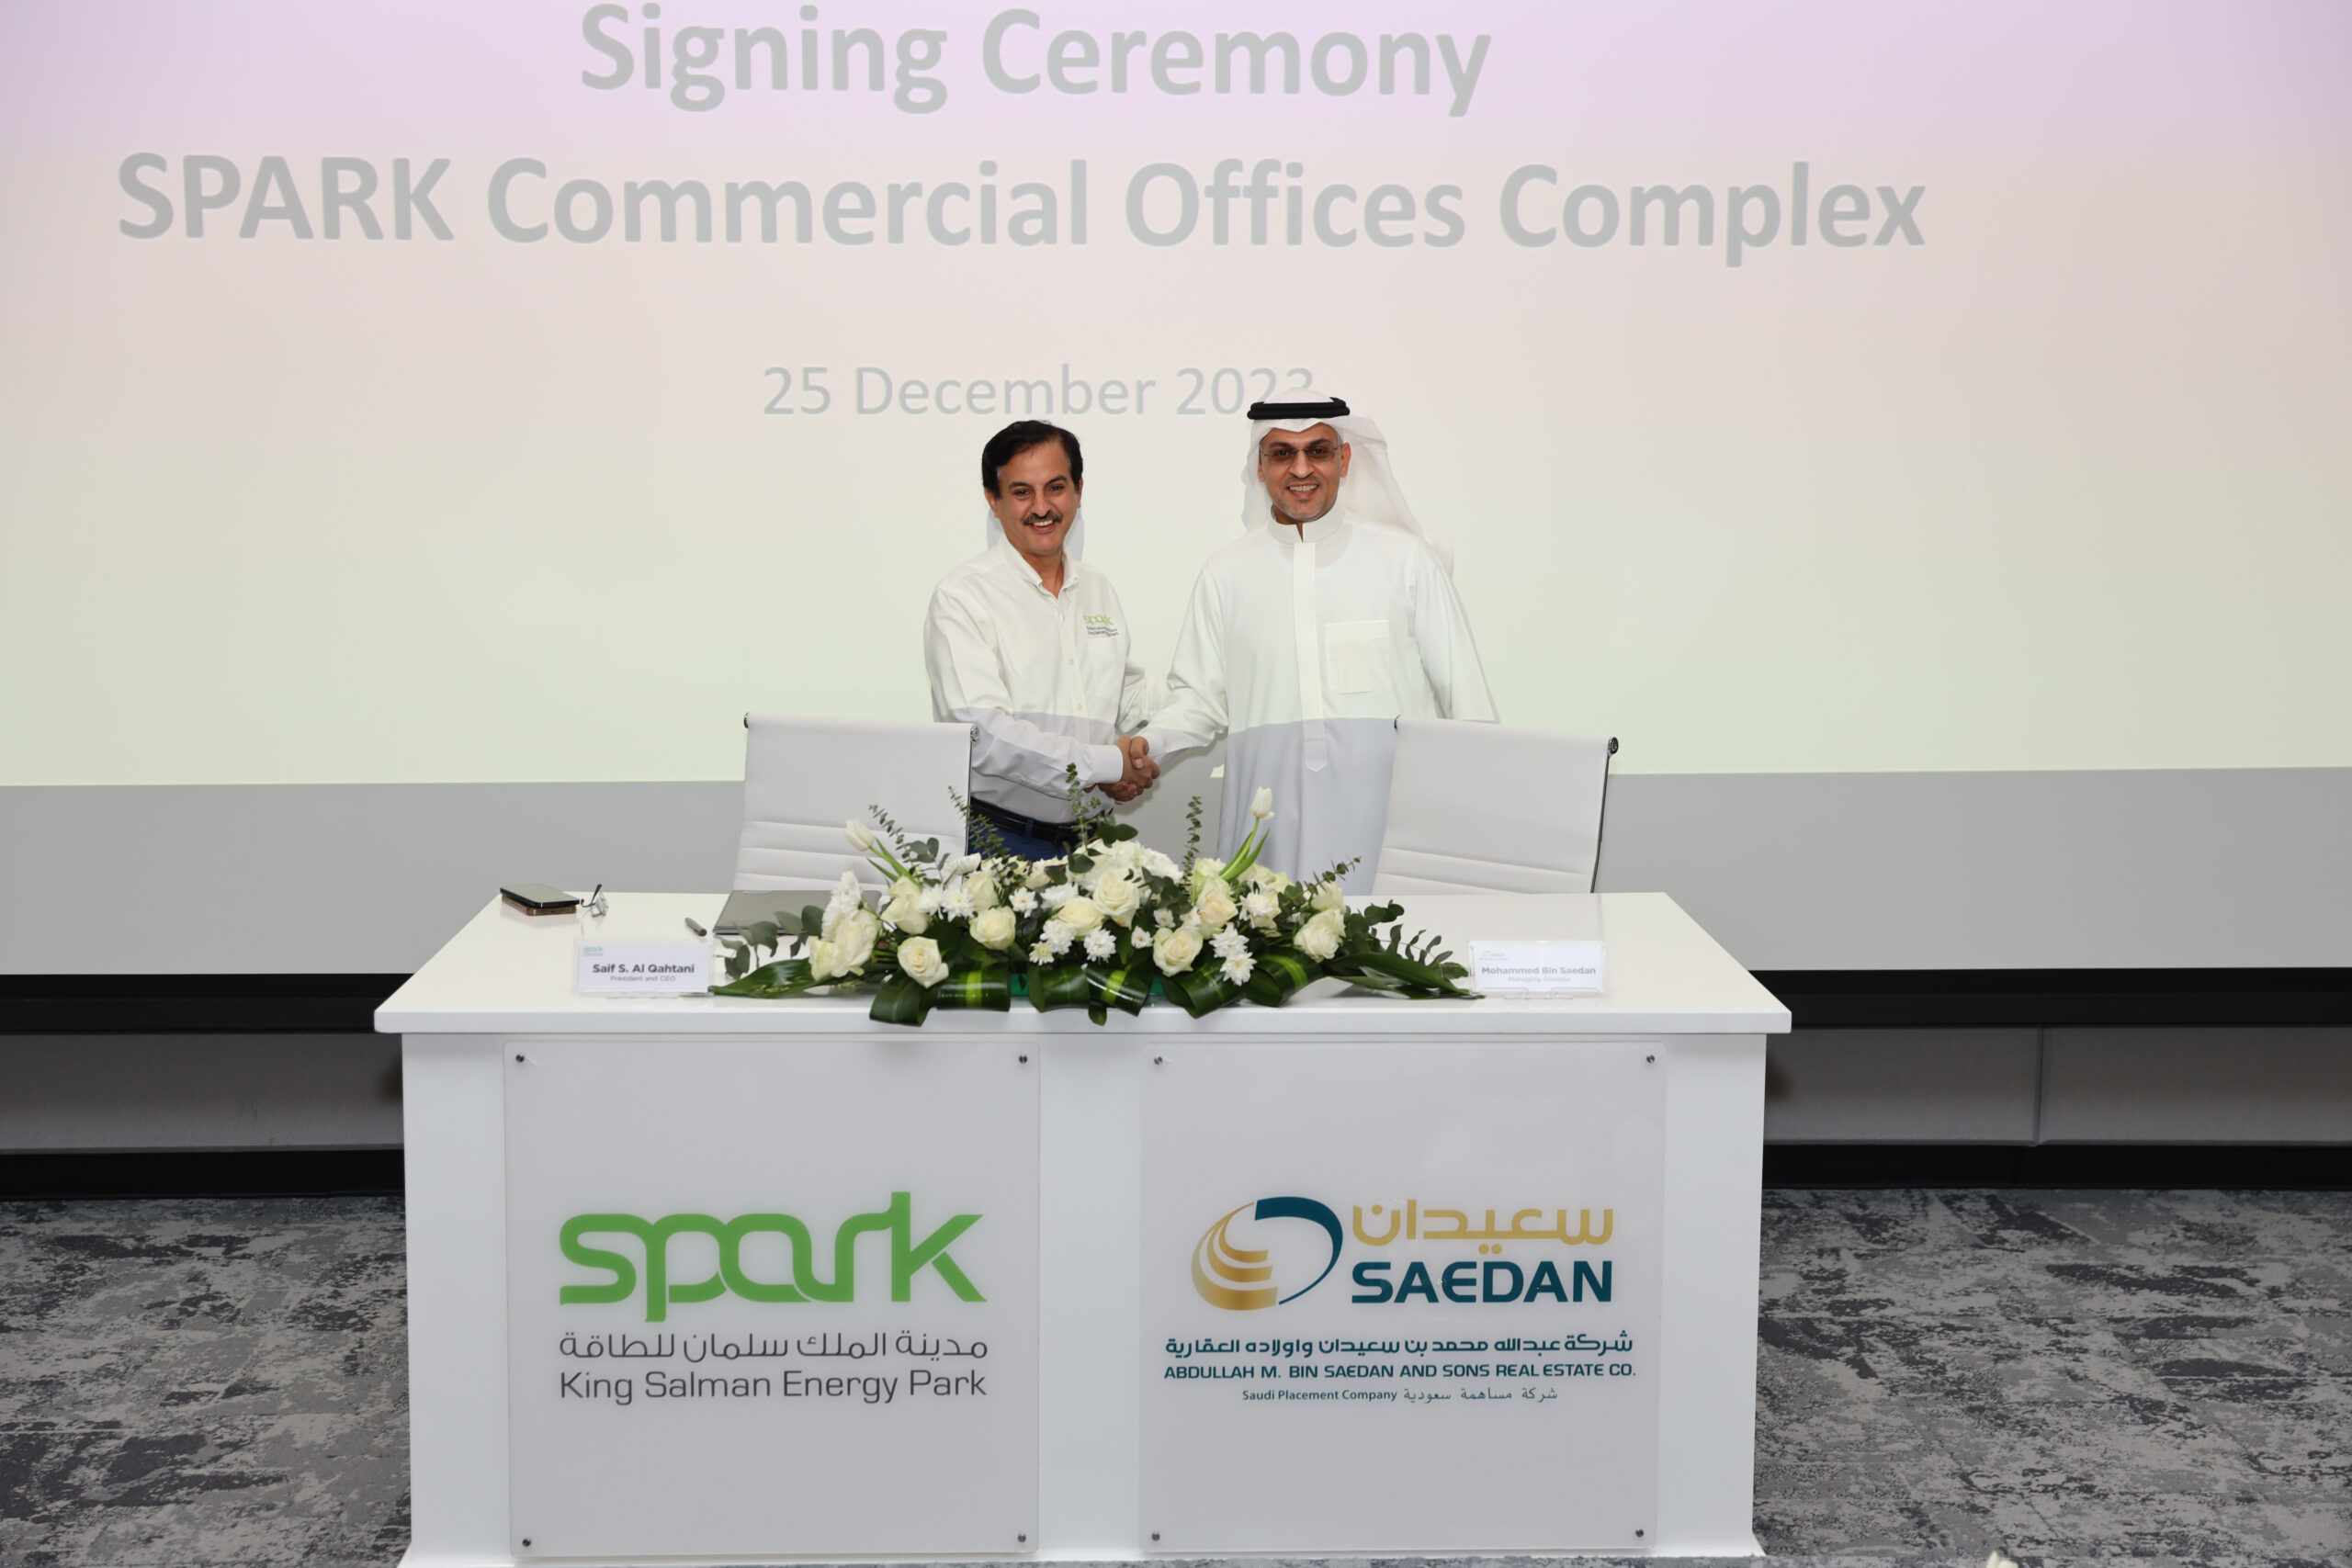 saudi,launch,commercial,residential,spark